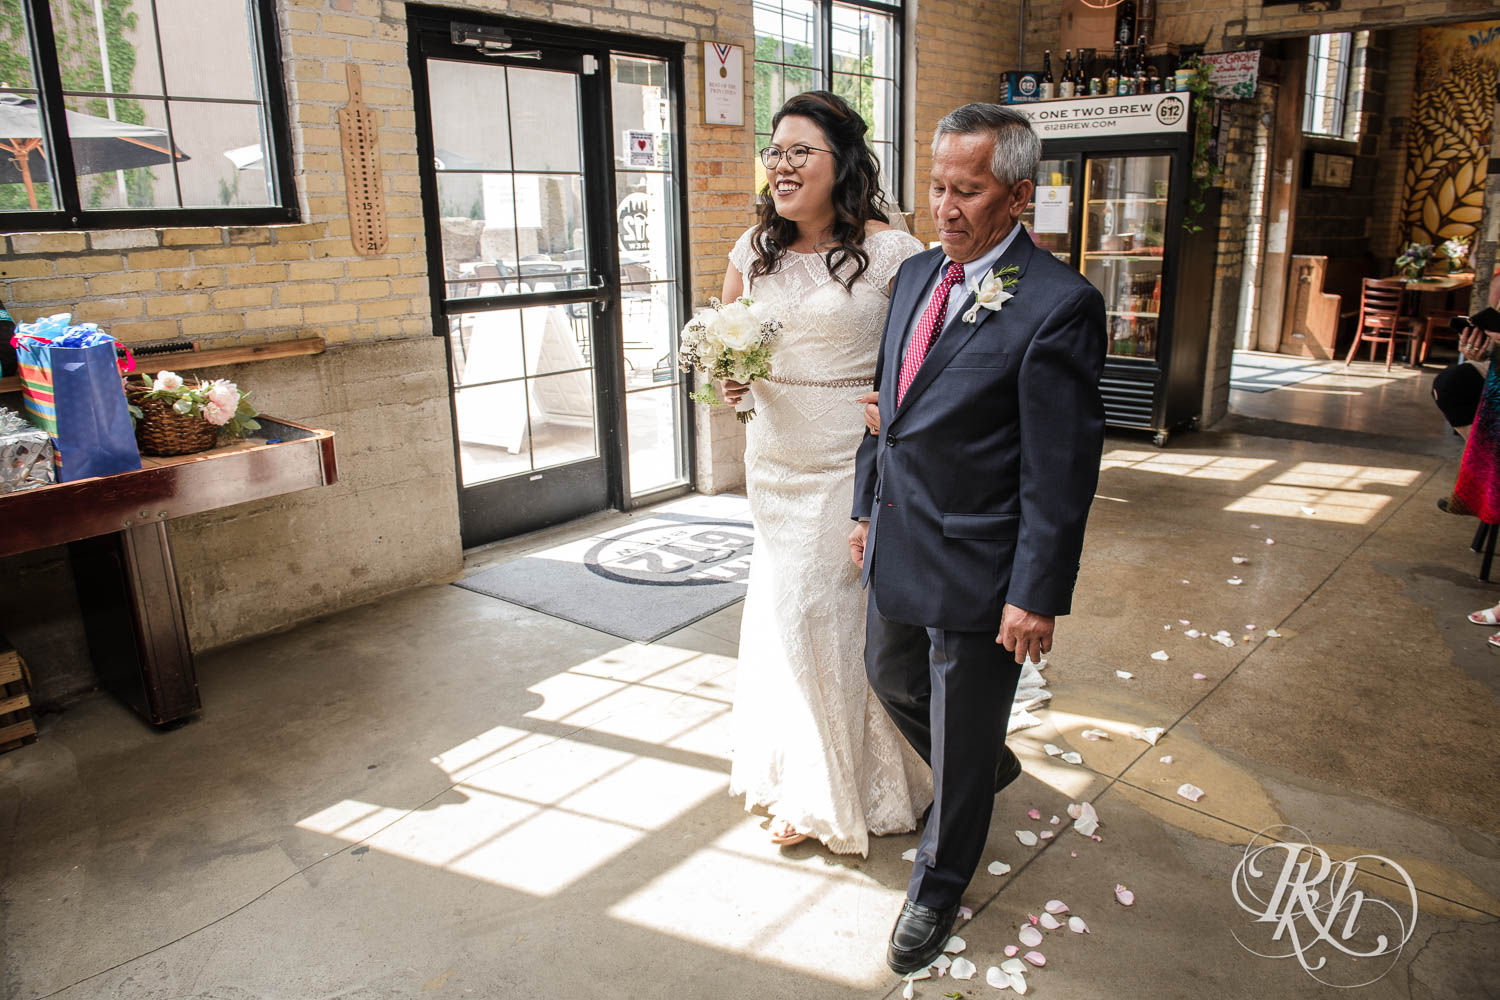 Asian bride walks down the aisle during wedding ceremony at 612 Brew in Minneapolis, Minnesota.